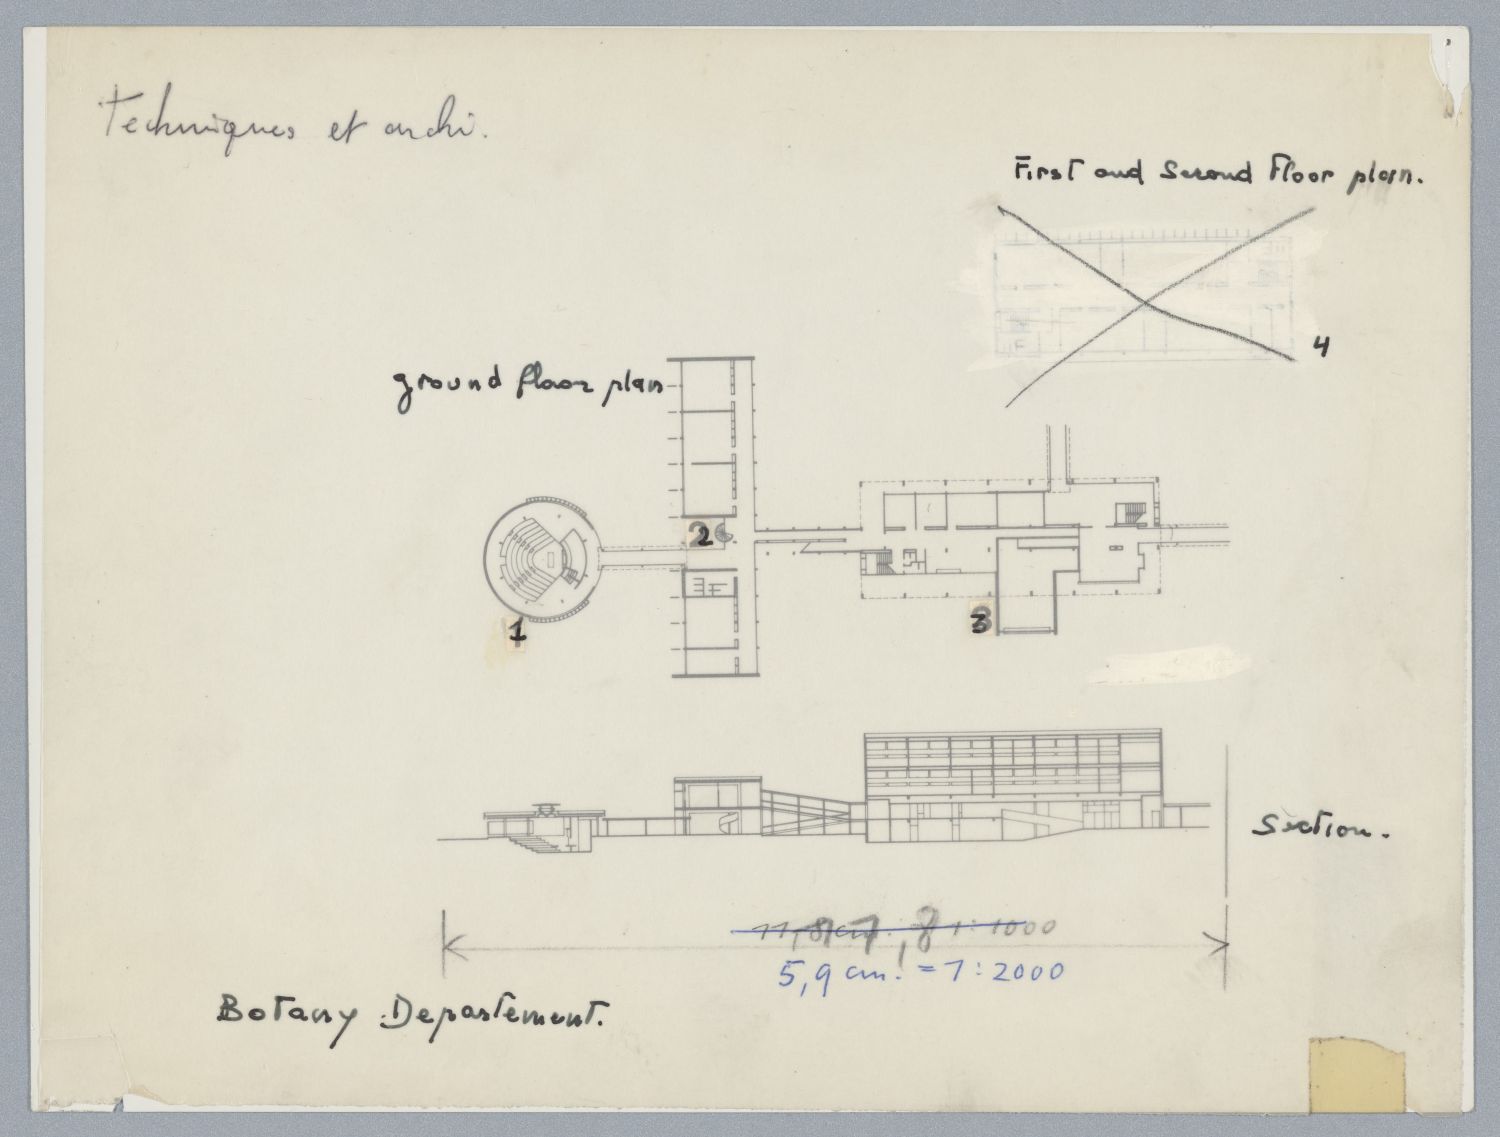 <p>Botany Department: plan and section overlaid by transparent sheet with annotations.</p>